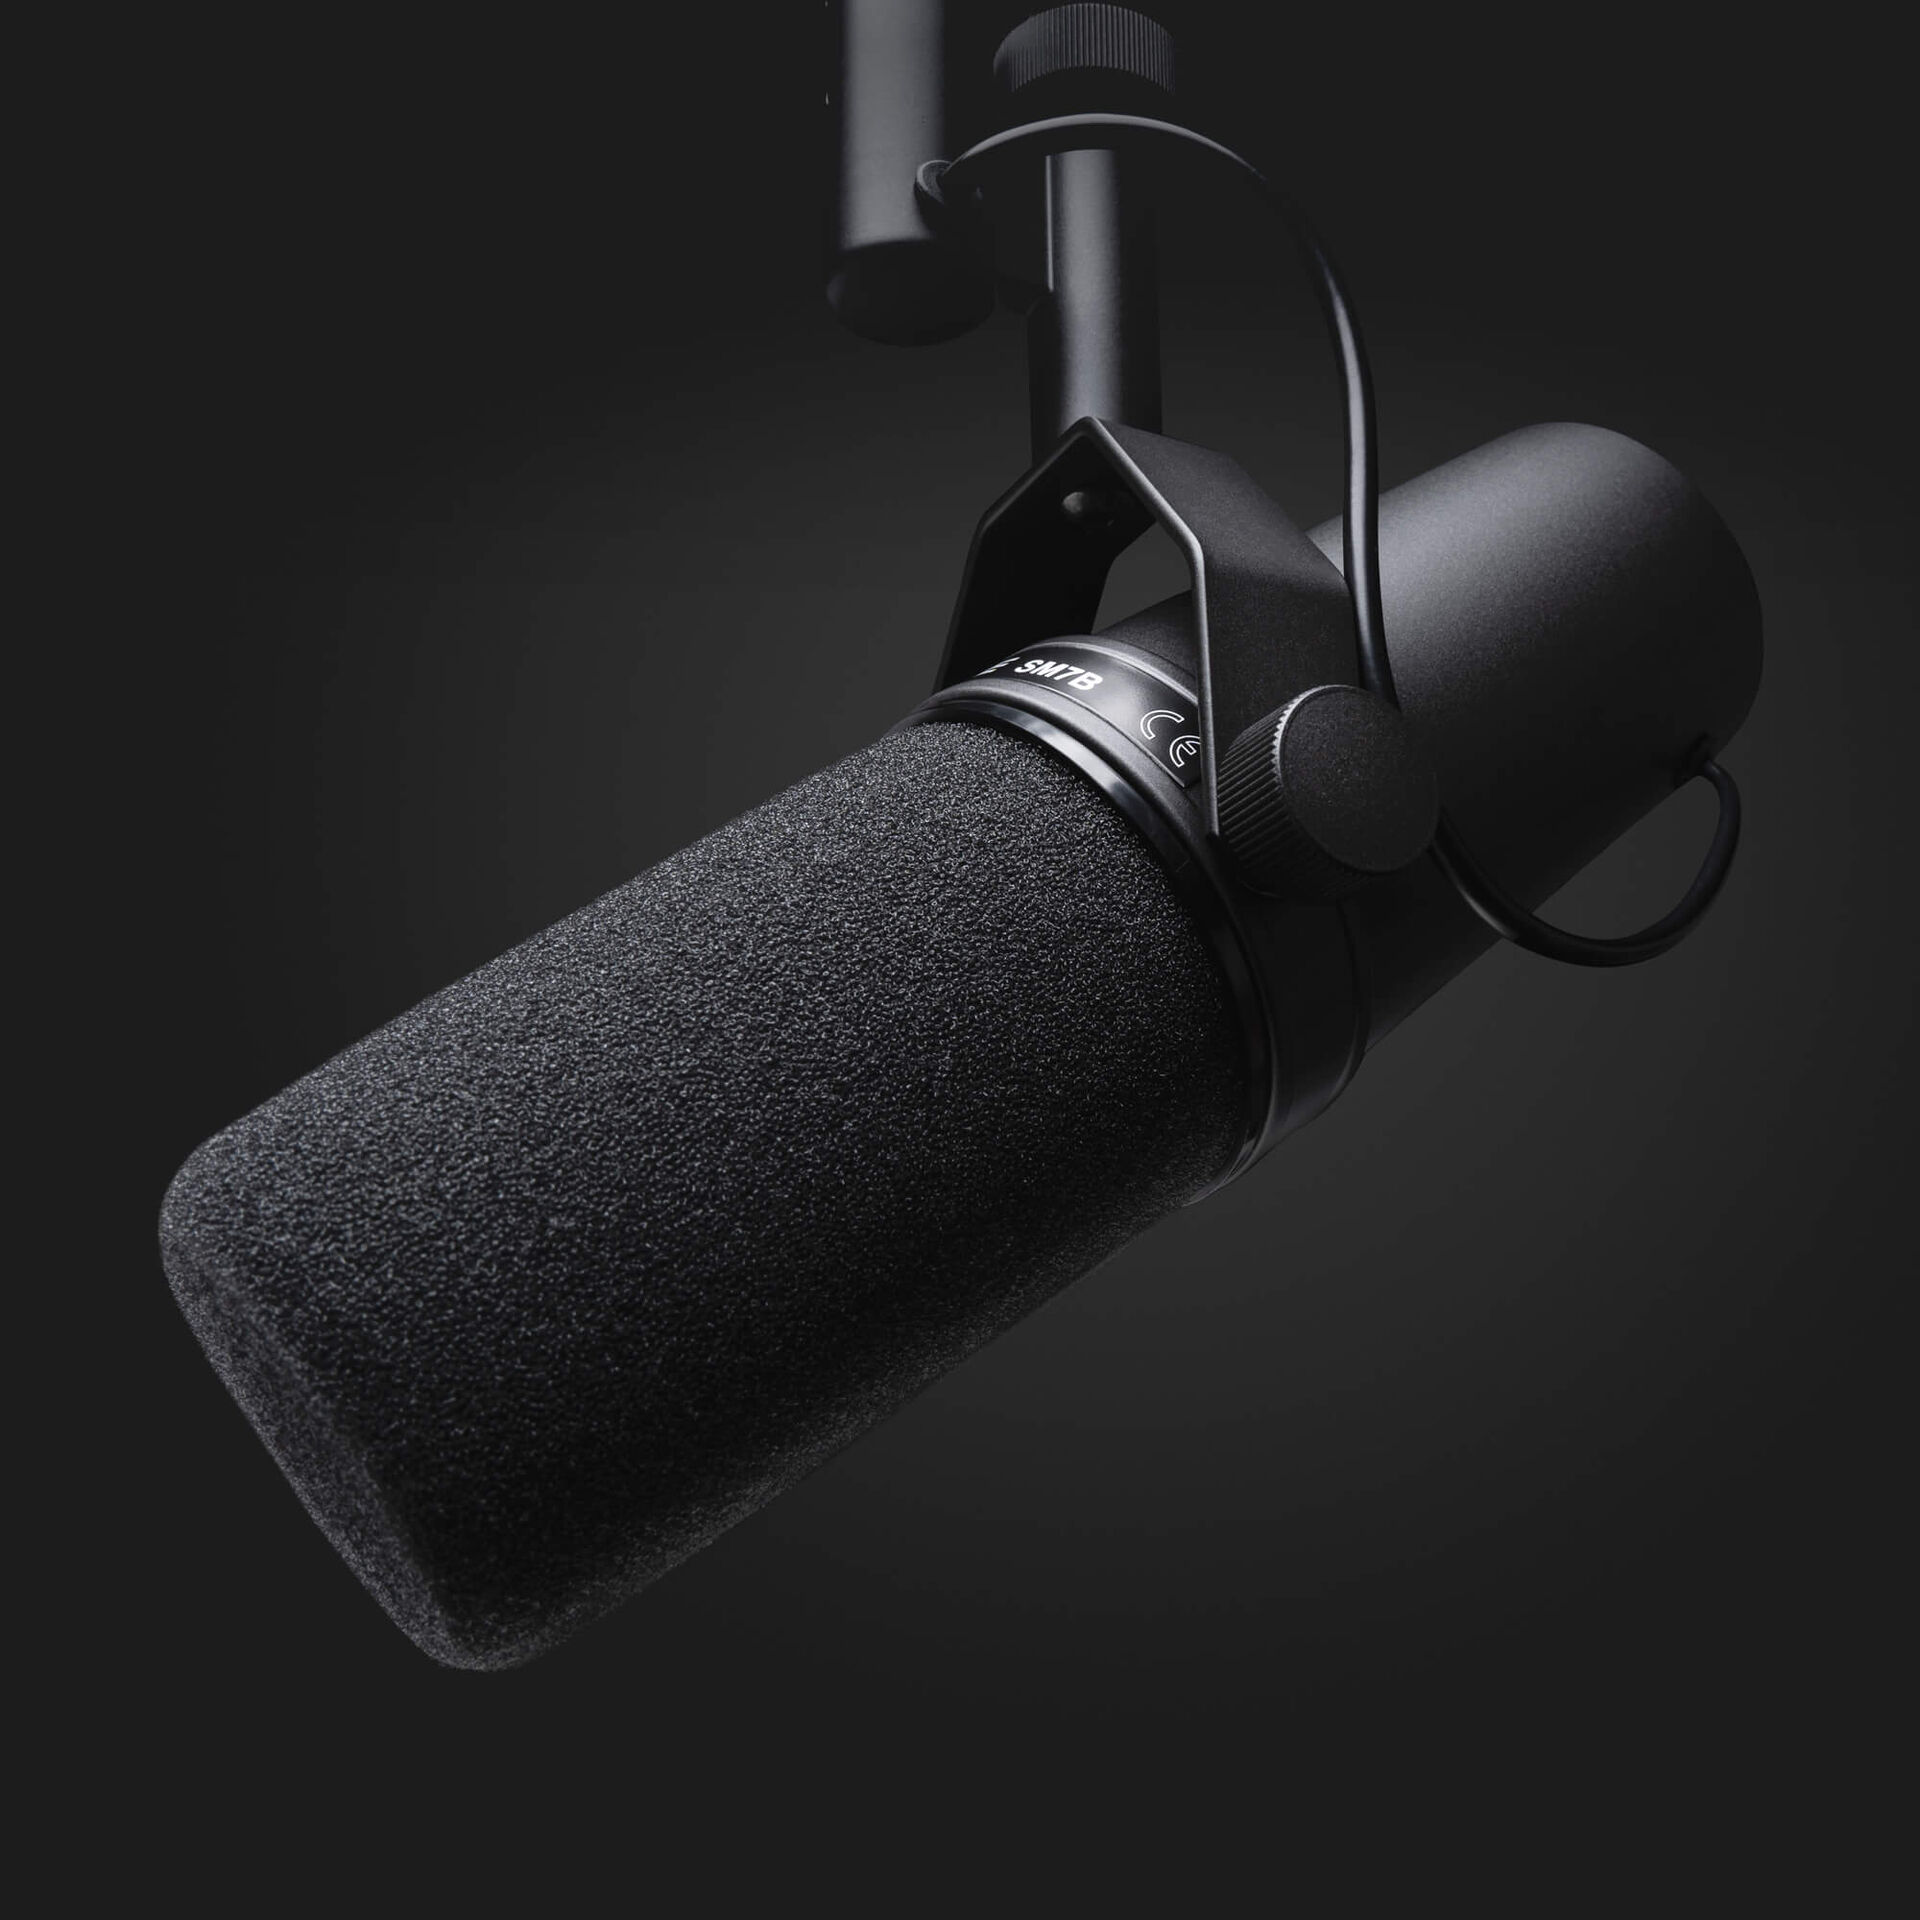 Podcasting Microphones